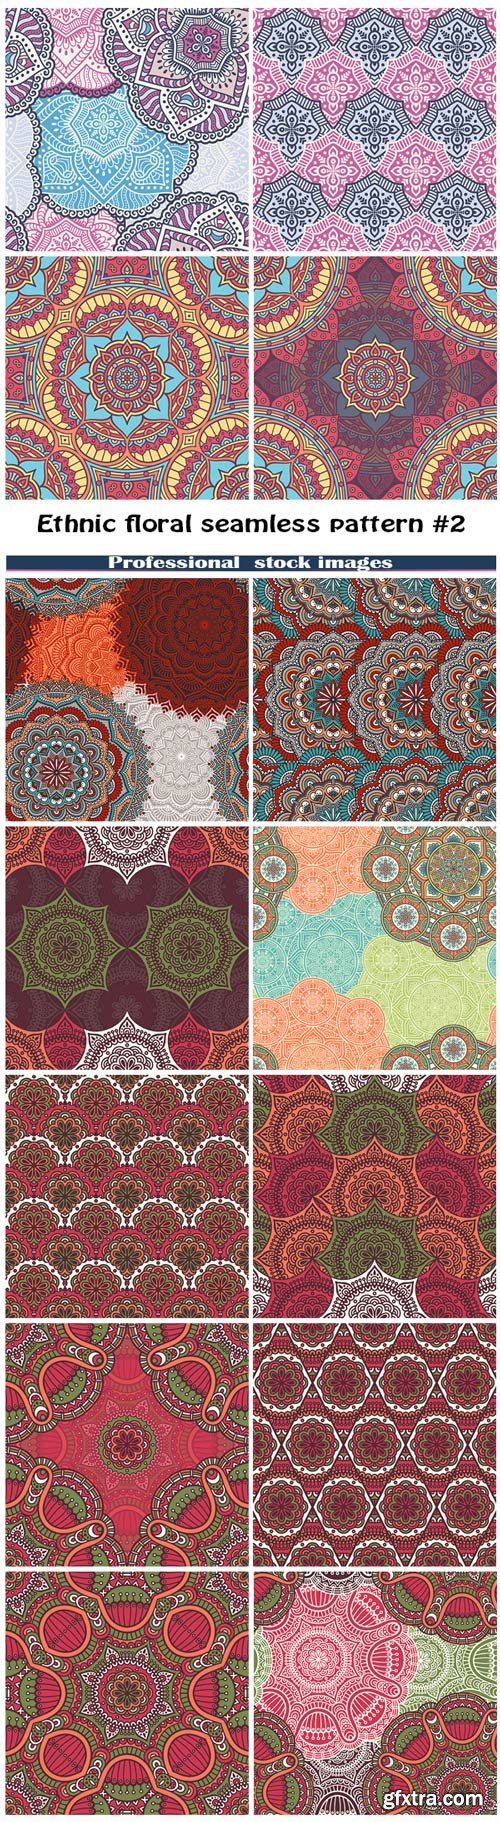 Ethnic floral seamless pattern #2